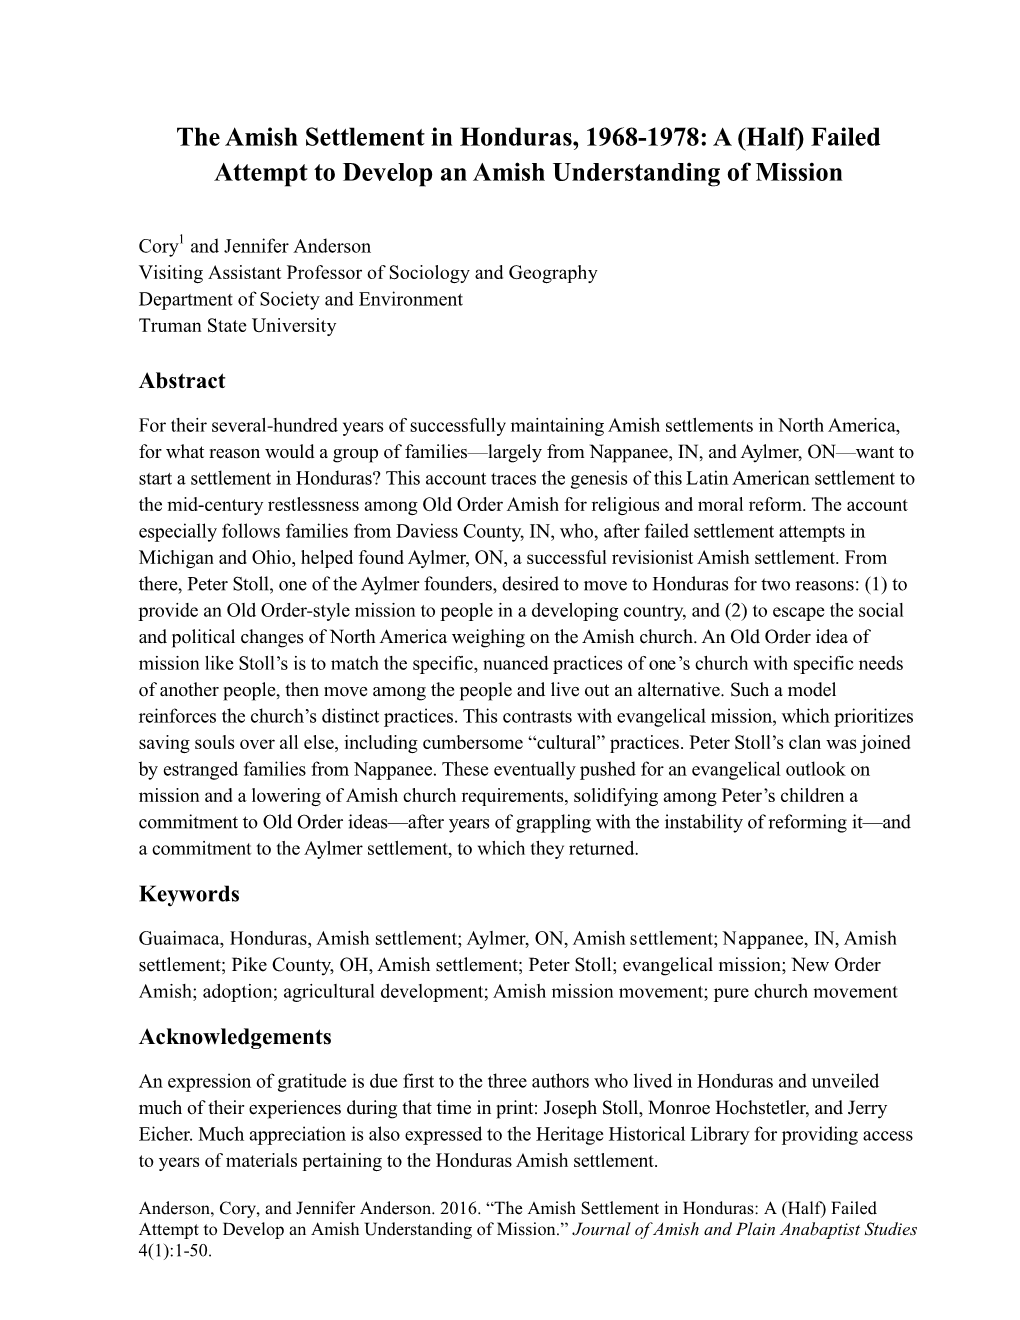 The Amish Settlement in Honduras, 1968-1978: a (Half) Failed Attempt to Develop an Amish Understanding of Mission